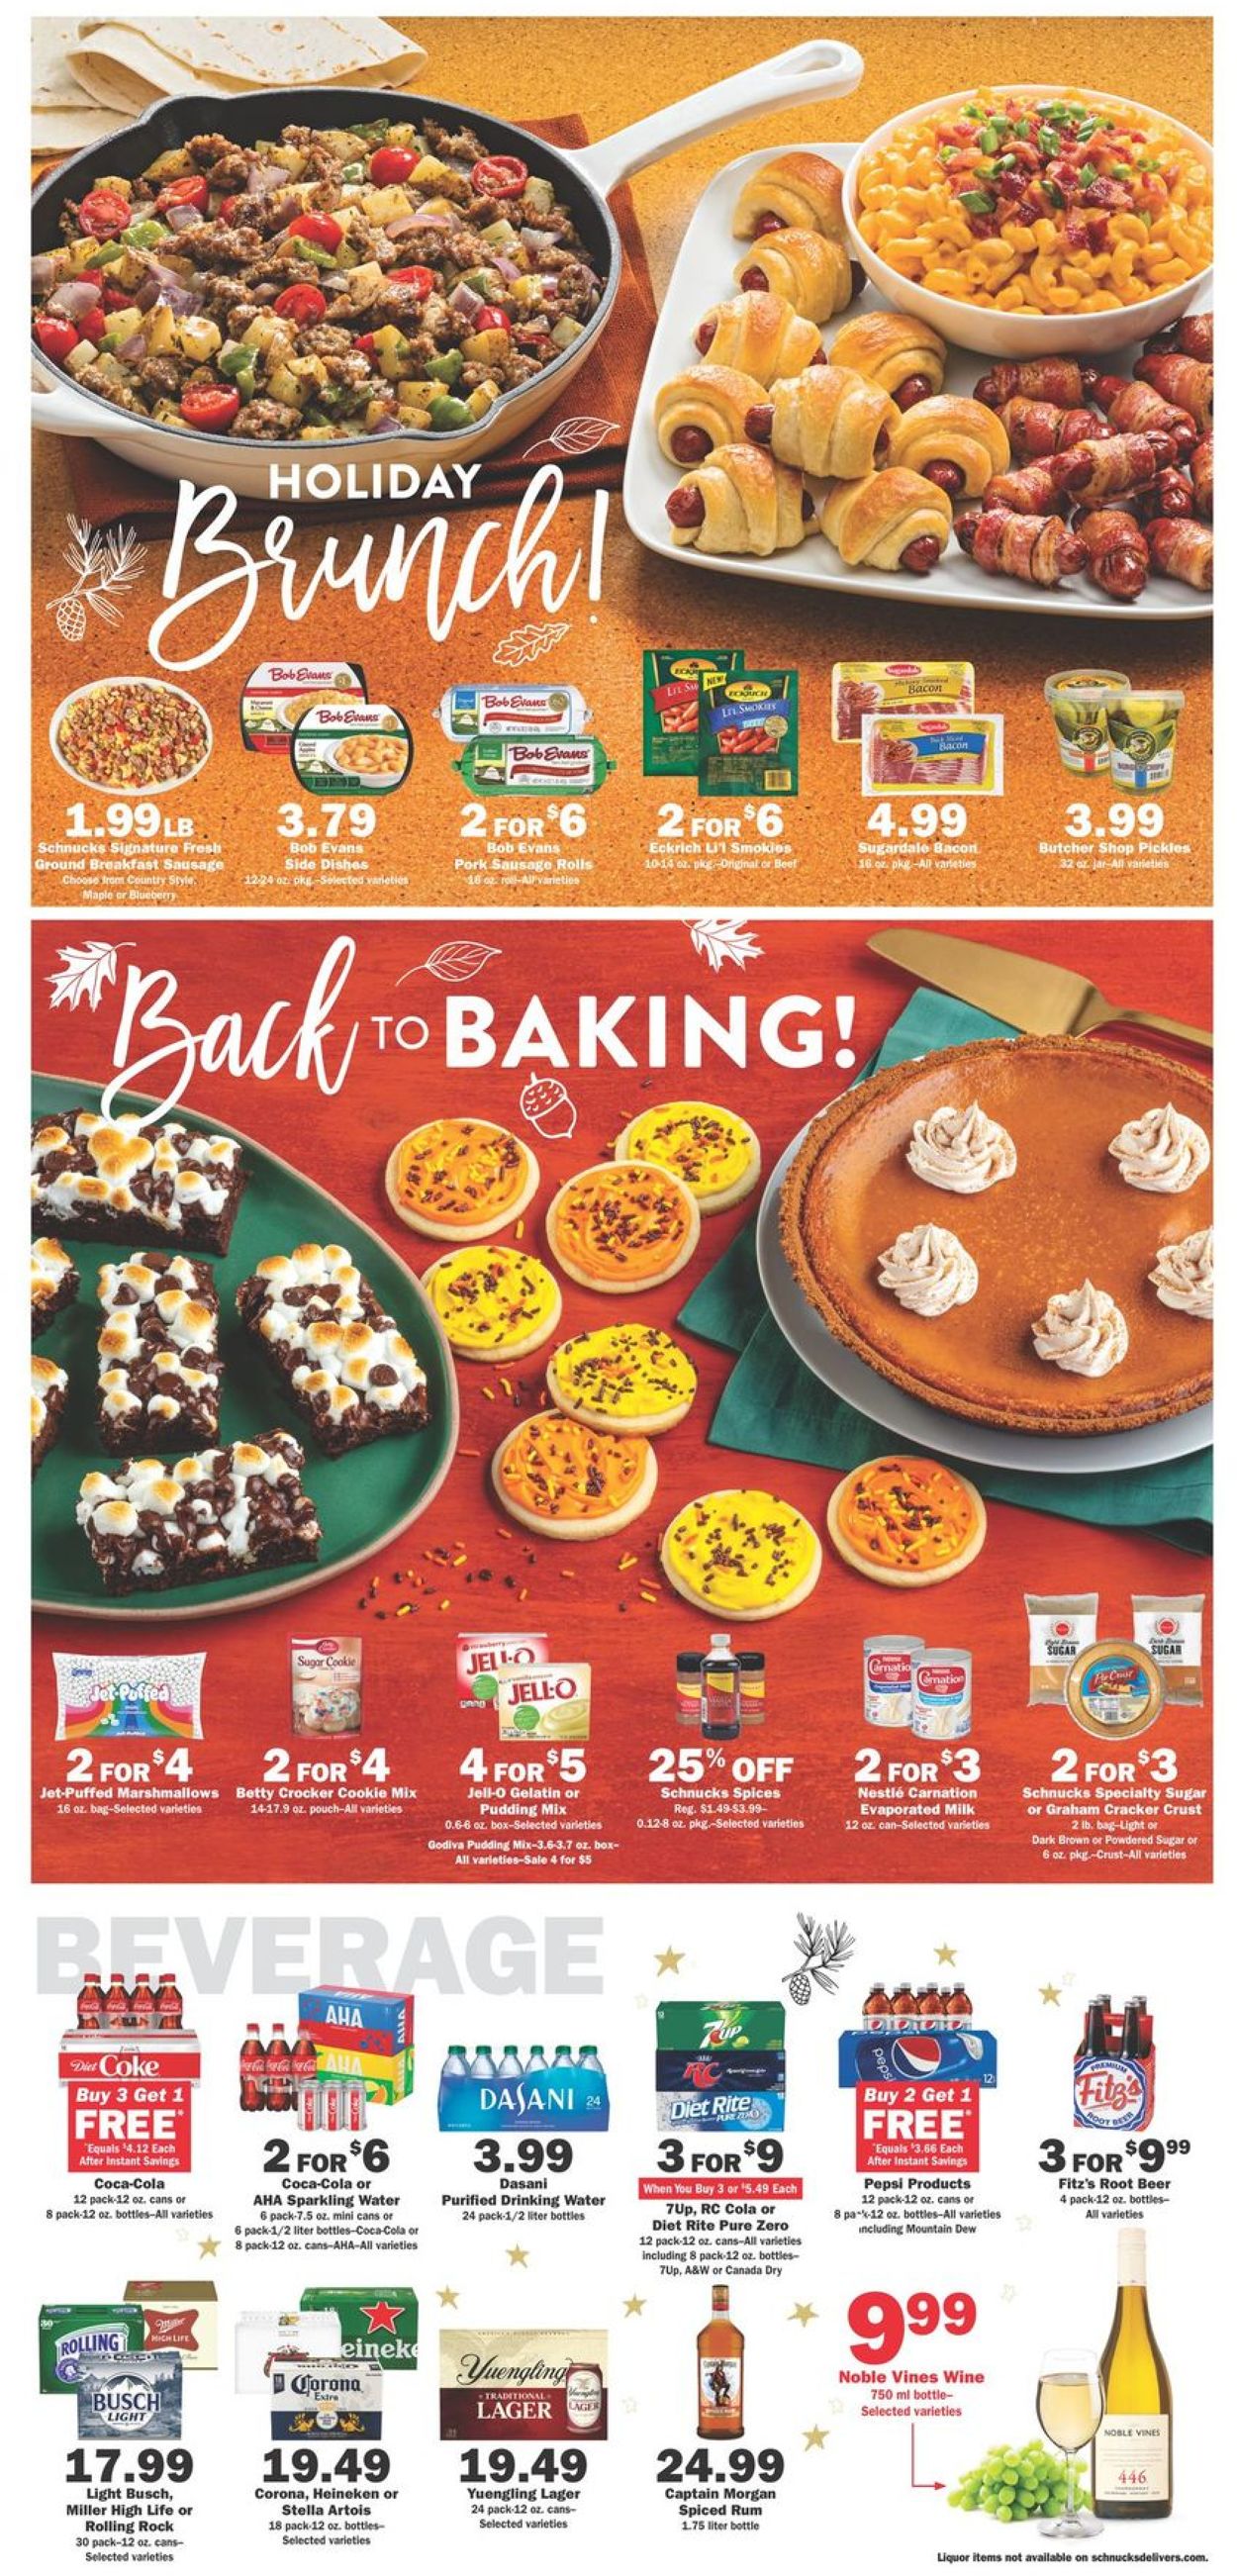 Schnucks Current weekly ad 11/11 - 11/17/2020 [3] - frequent-ads.com